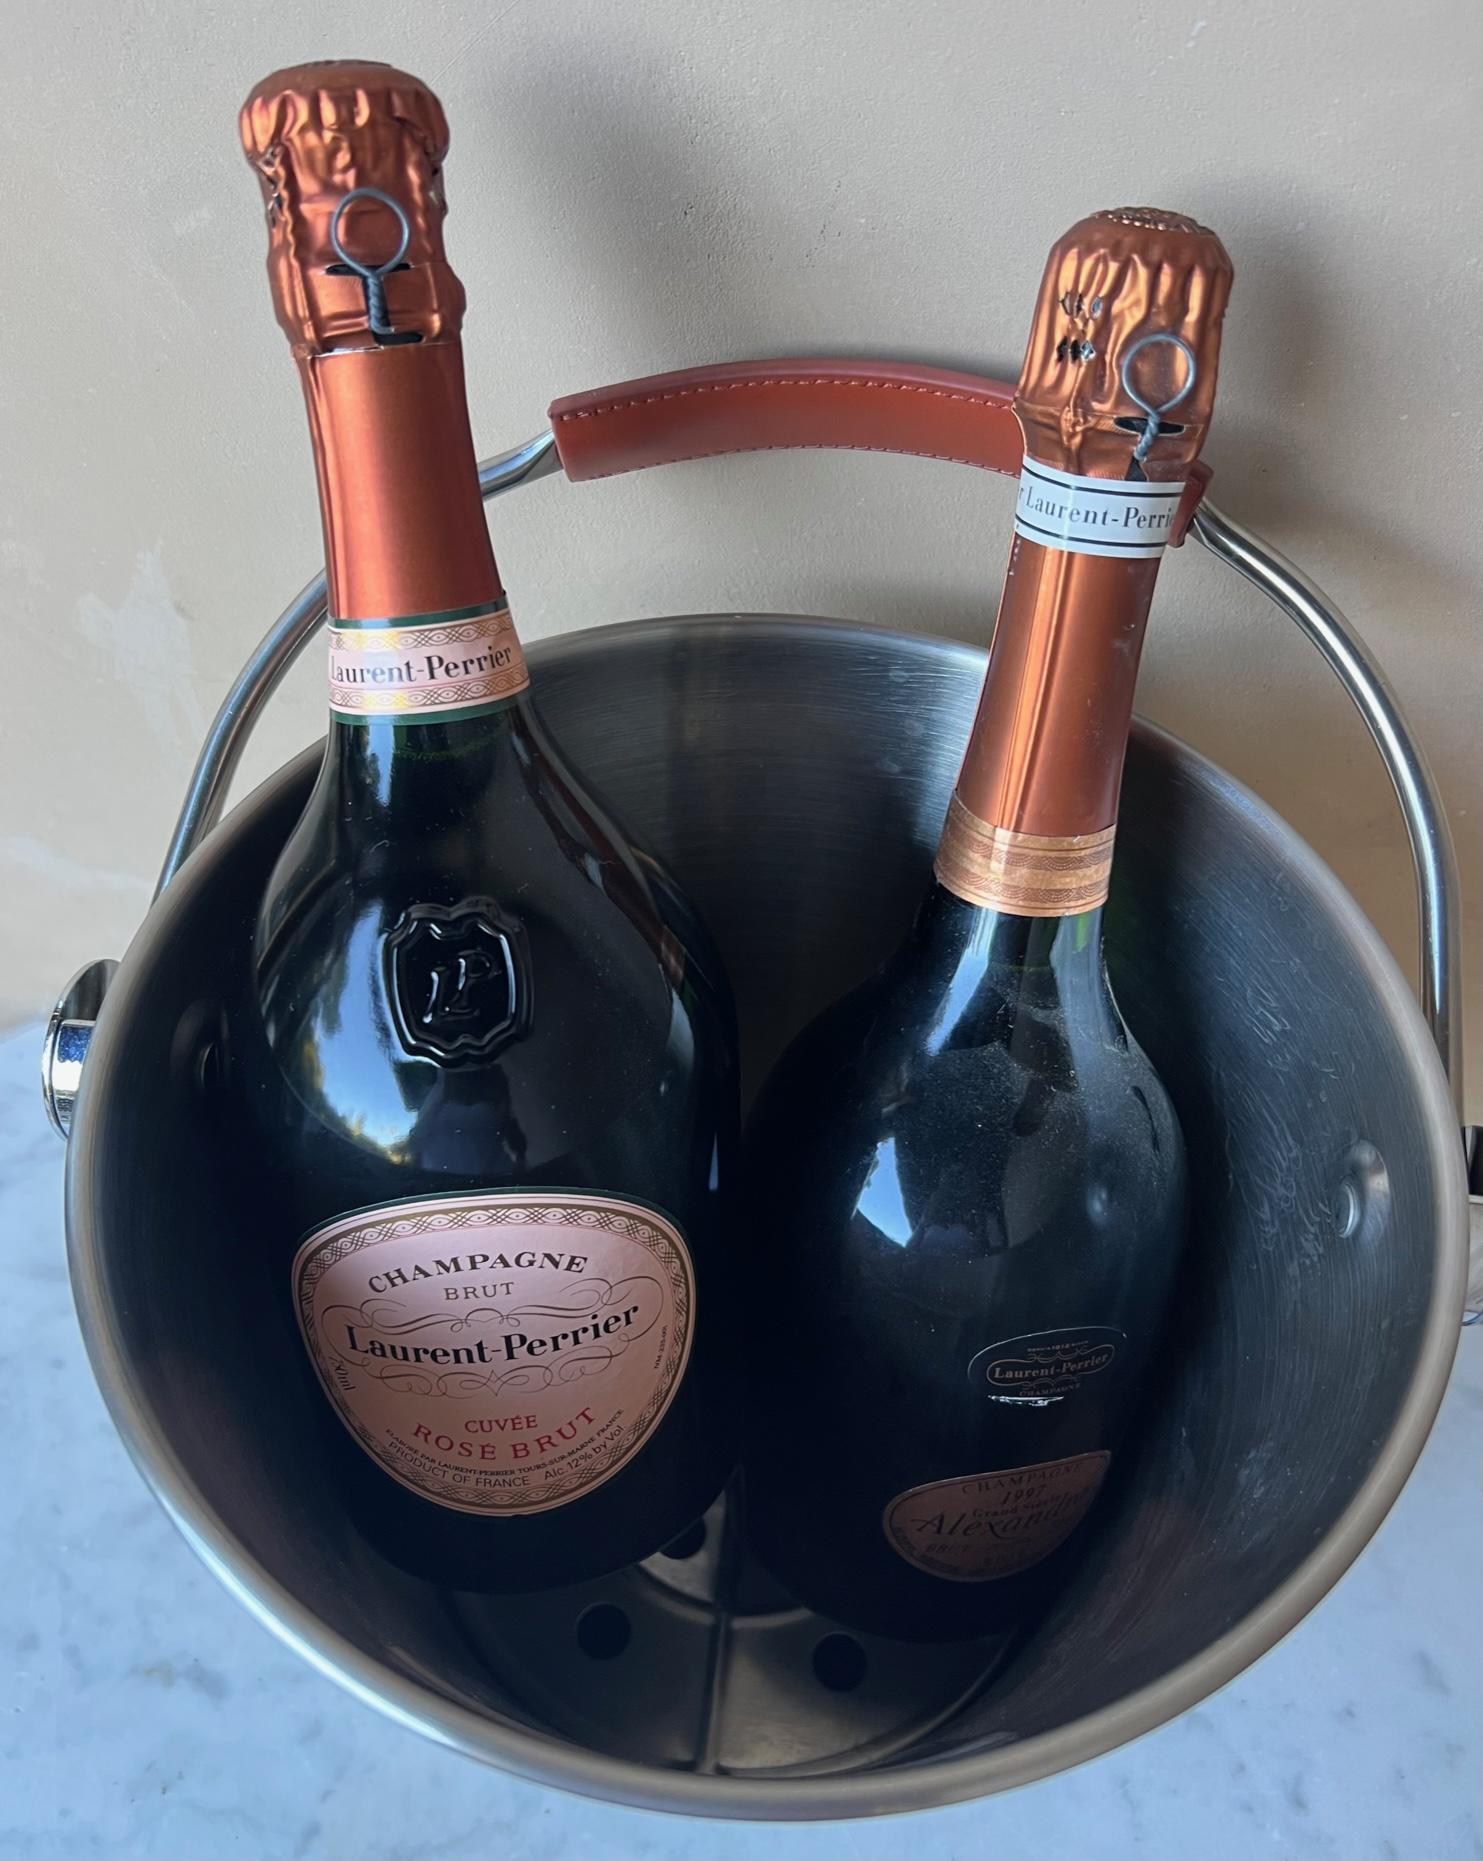 Large magnum or double champagne bottle sized metal bucket from Laurent-Perrier. The bucket includes a gold toned label, leather handle and removable strainer at the bottom.